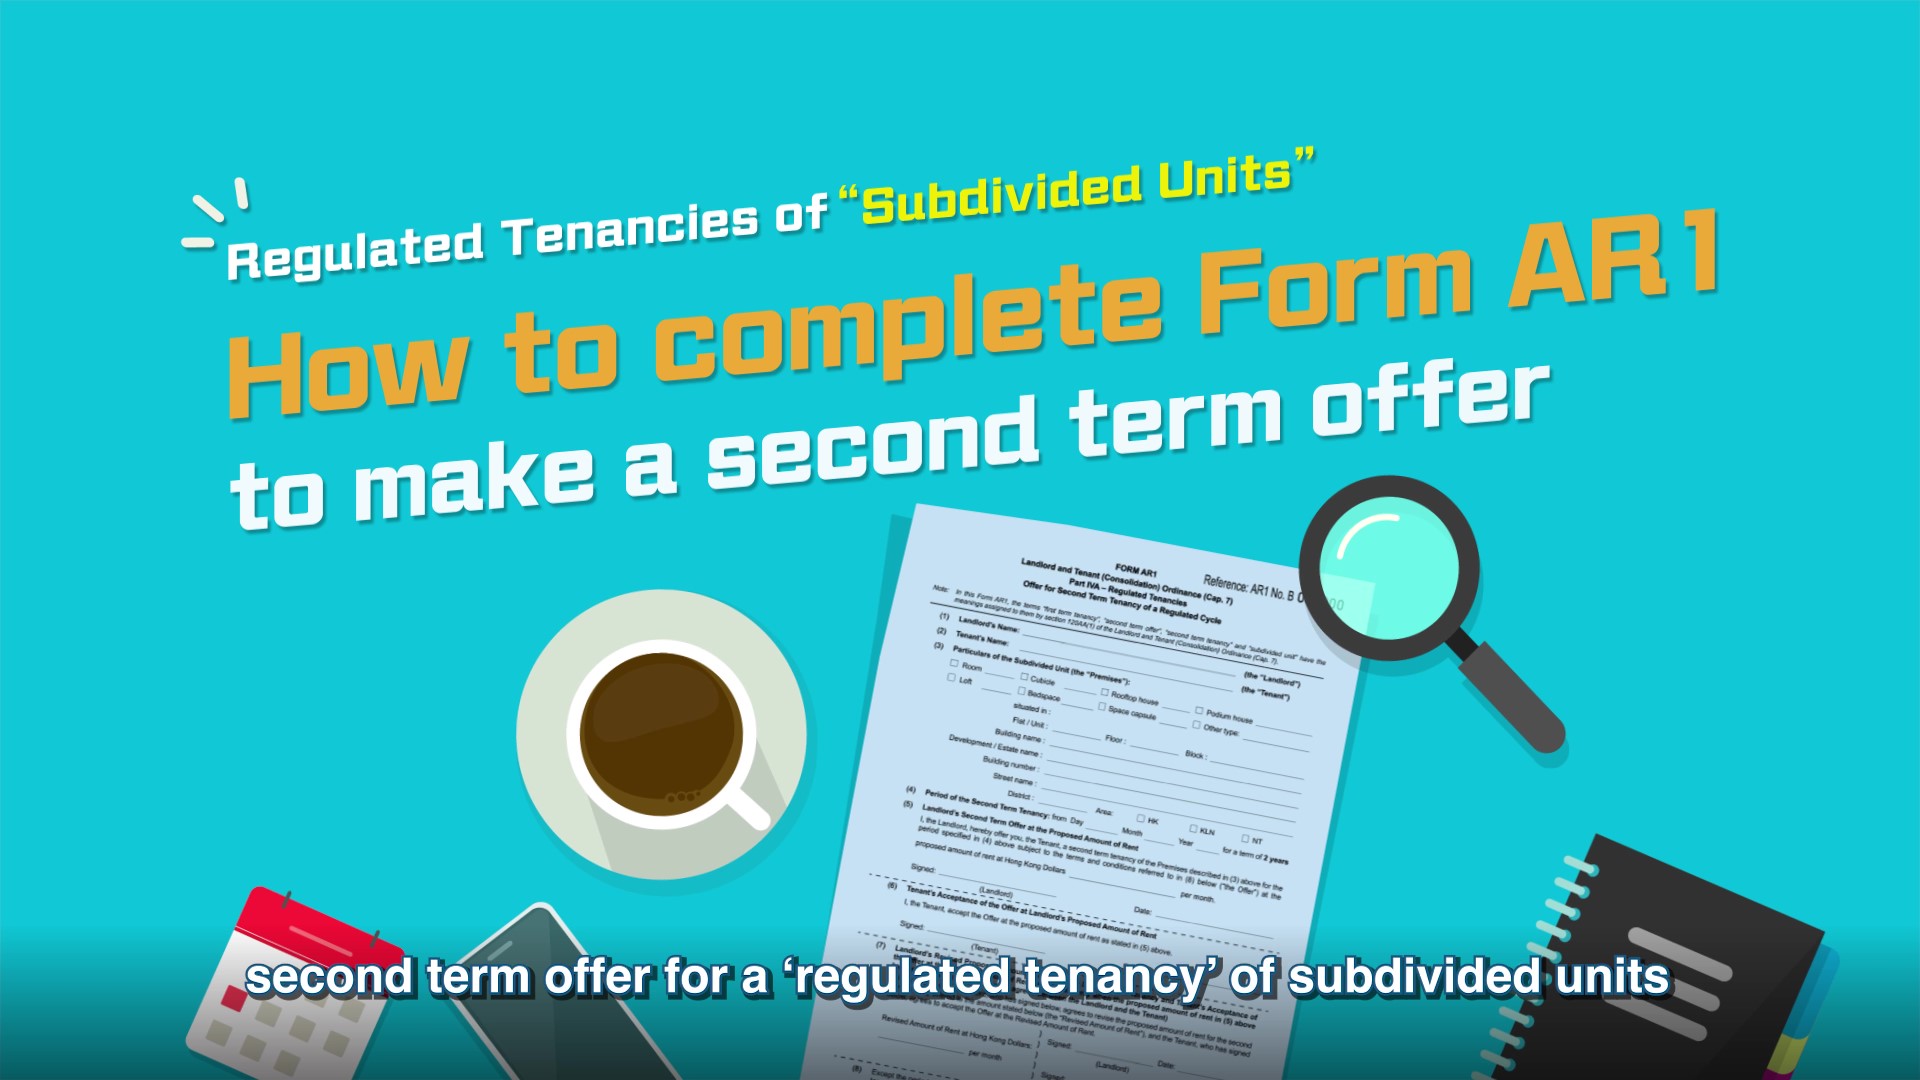 Tutorial Video: Regulated Tenancies of Subdivided Units - How to Complete Form AR1 to Make a Second Term Offer